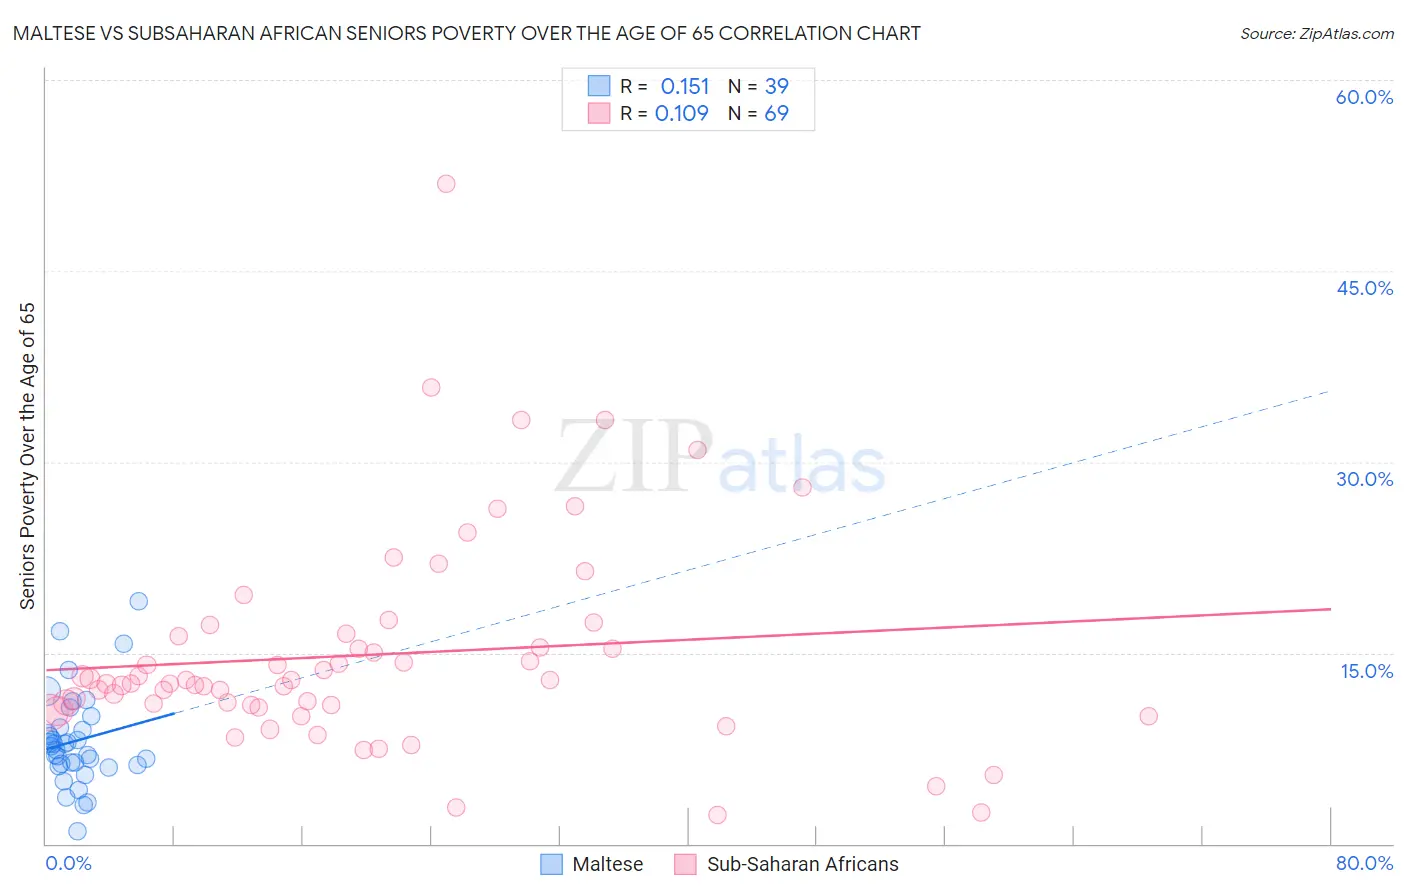 Maltese vs Subsaharan African Seniors Poverty Over the Age of 65